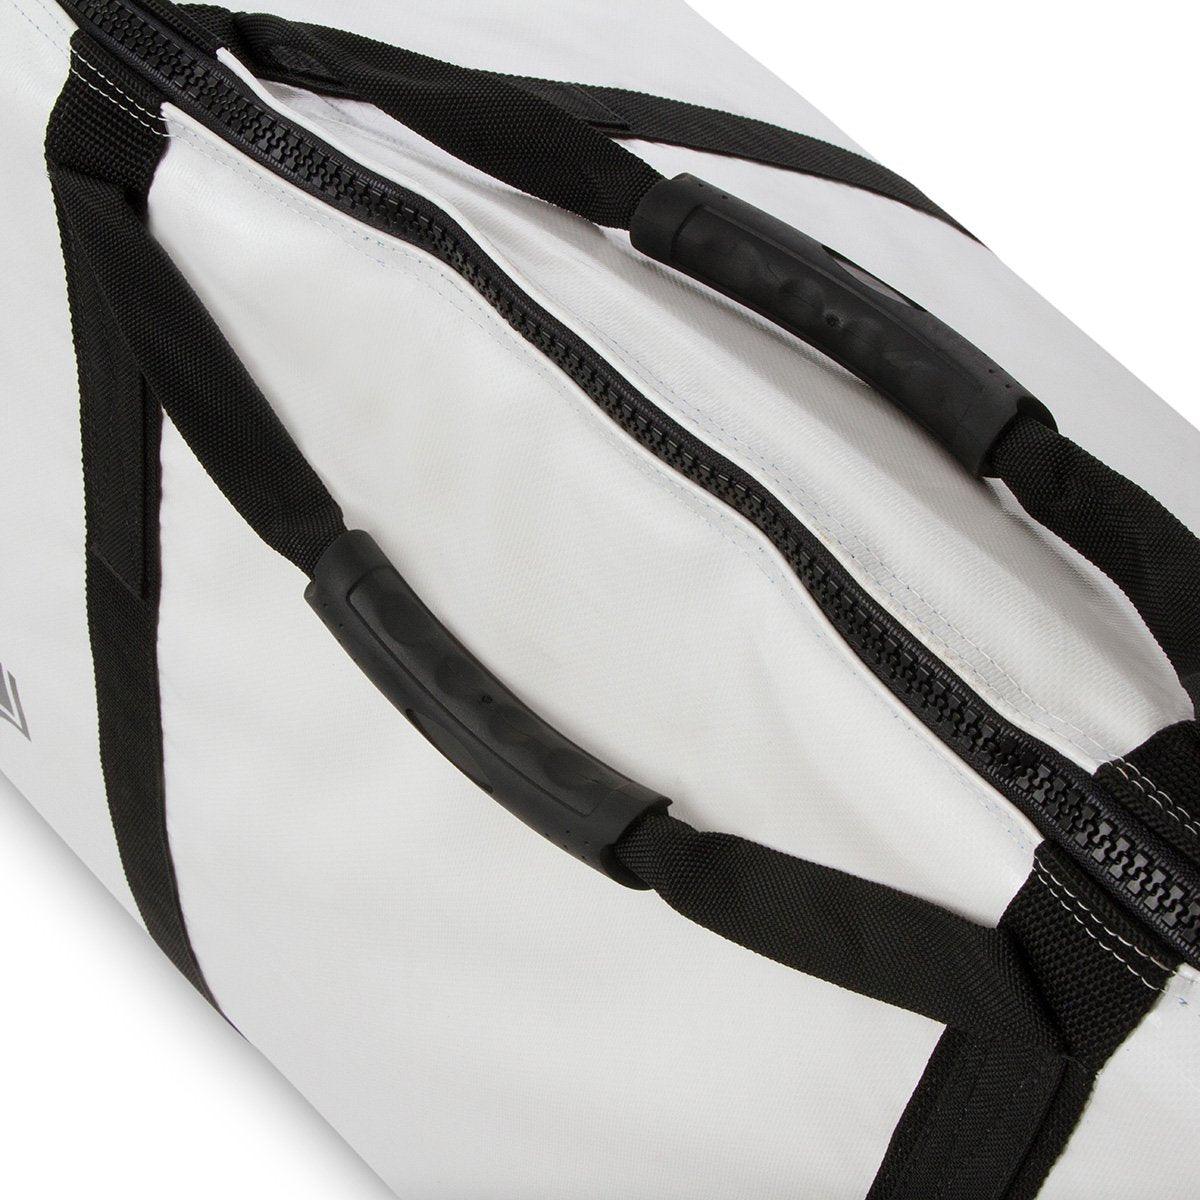 30" X 72" Insulated Kill Bag, Offshore Edition - RIPPING IT